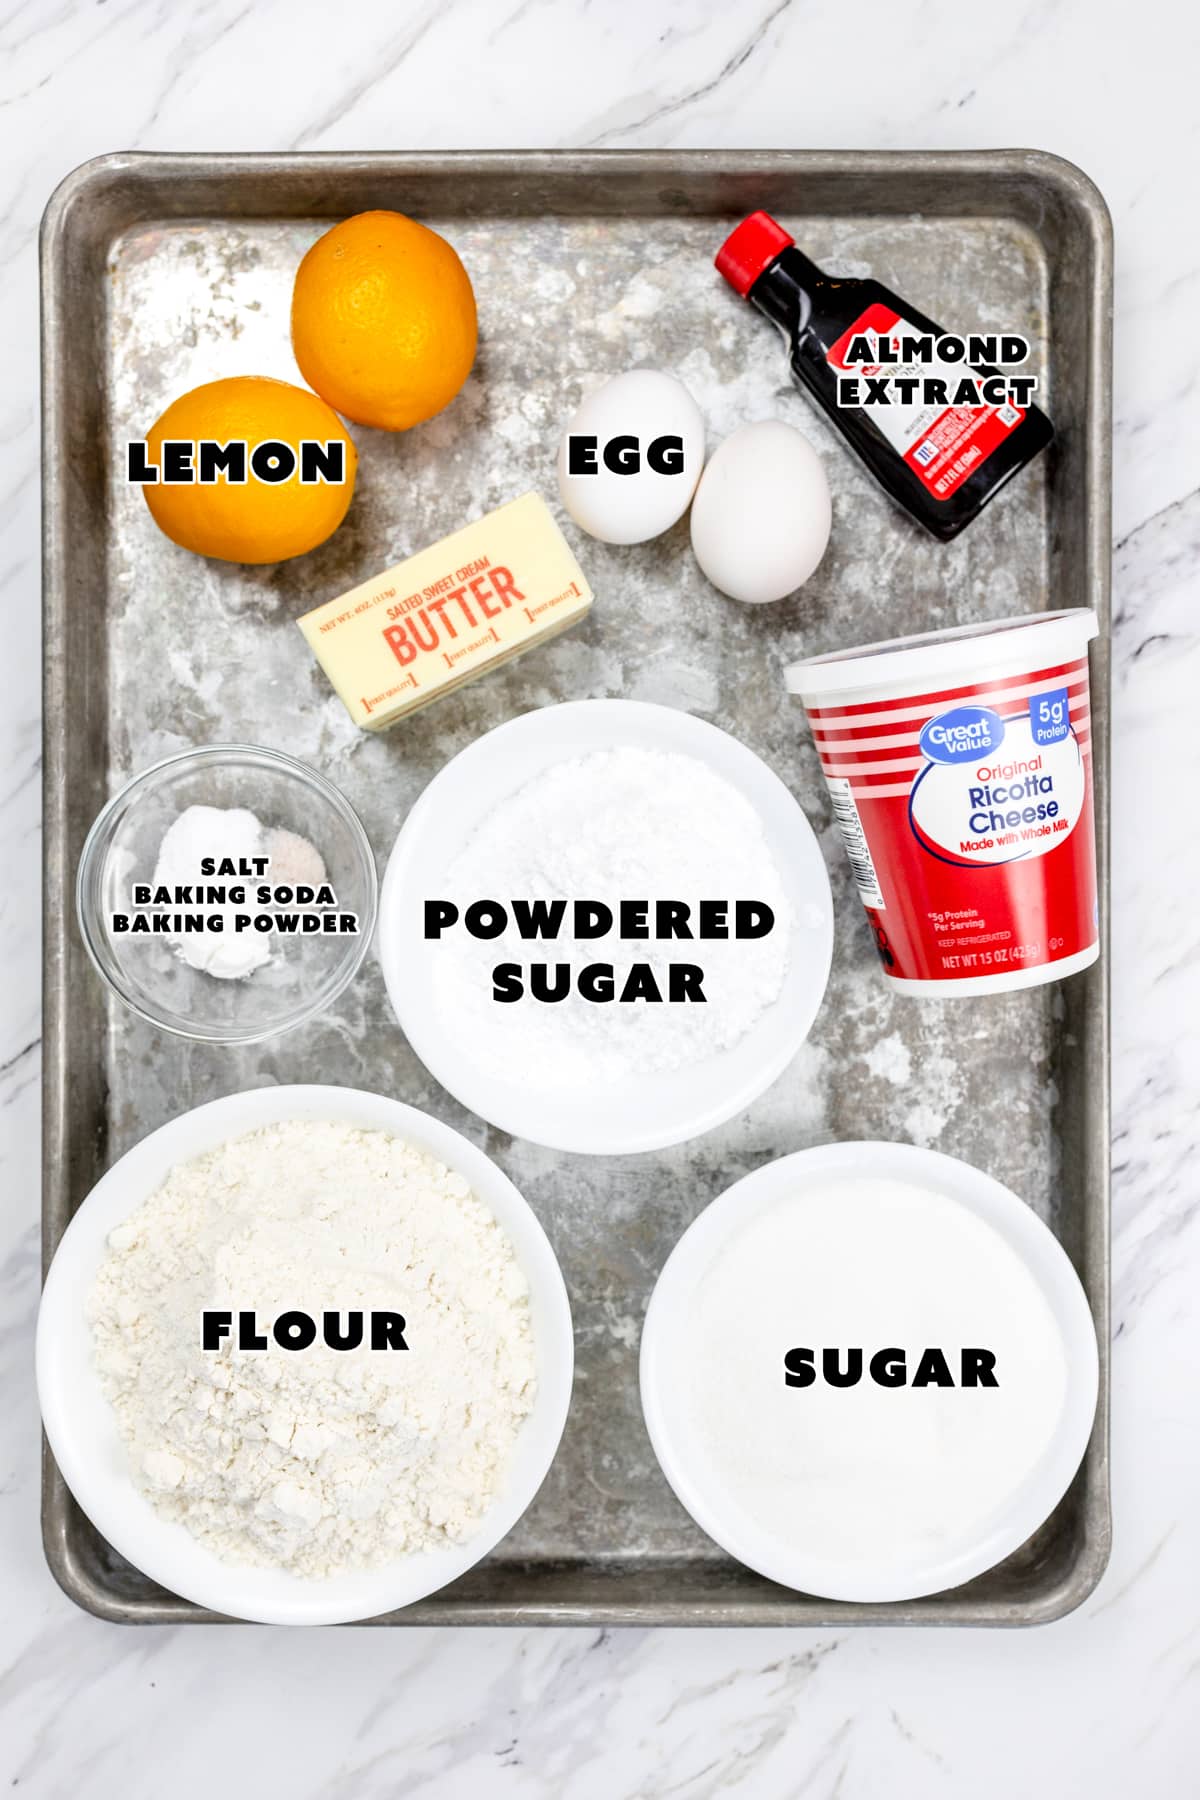 Top view of ingredients needed to make lemon ricotta cookies in small bowls on a baking tray.